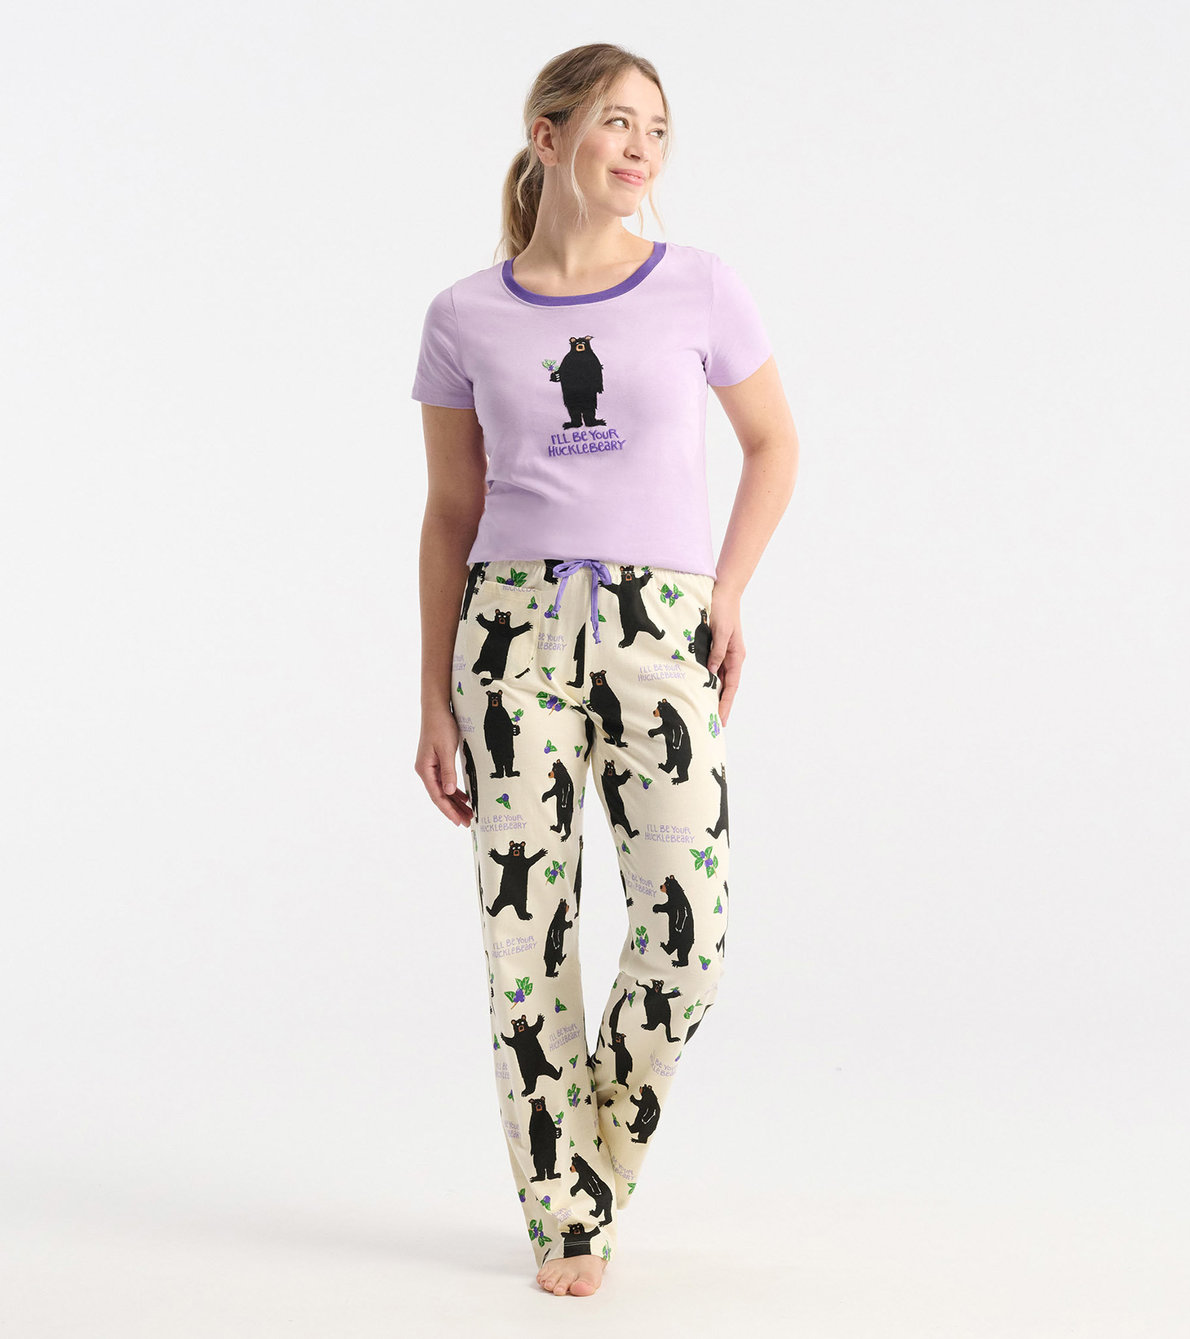 View larger image of Hucklebeary Women's Jersey Pajama Pants